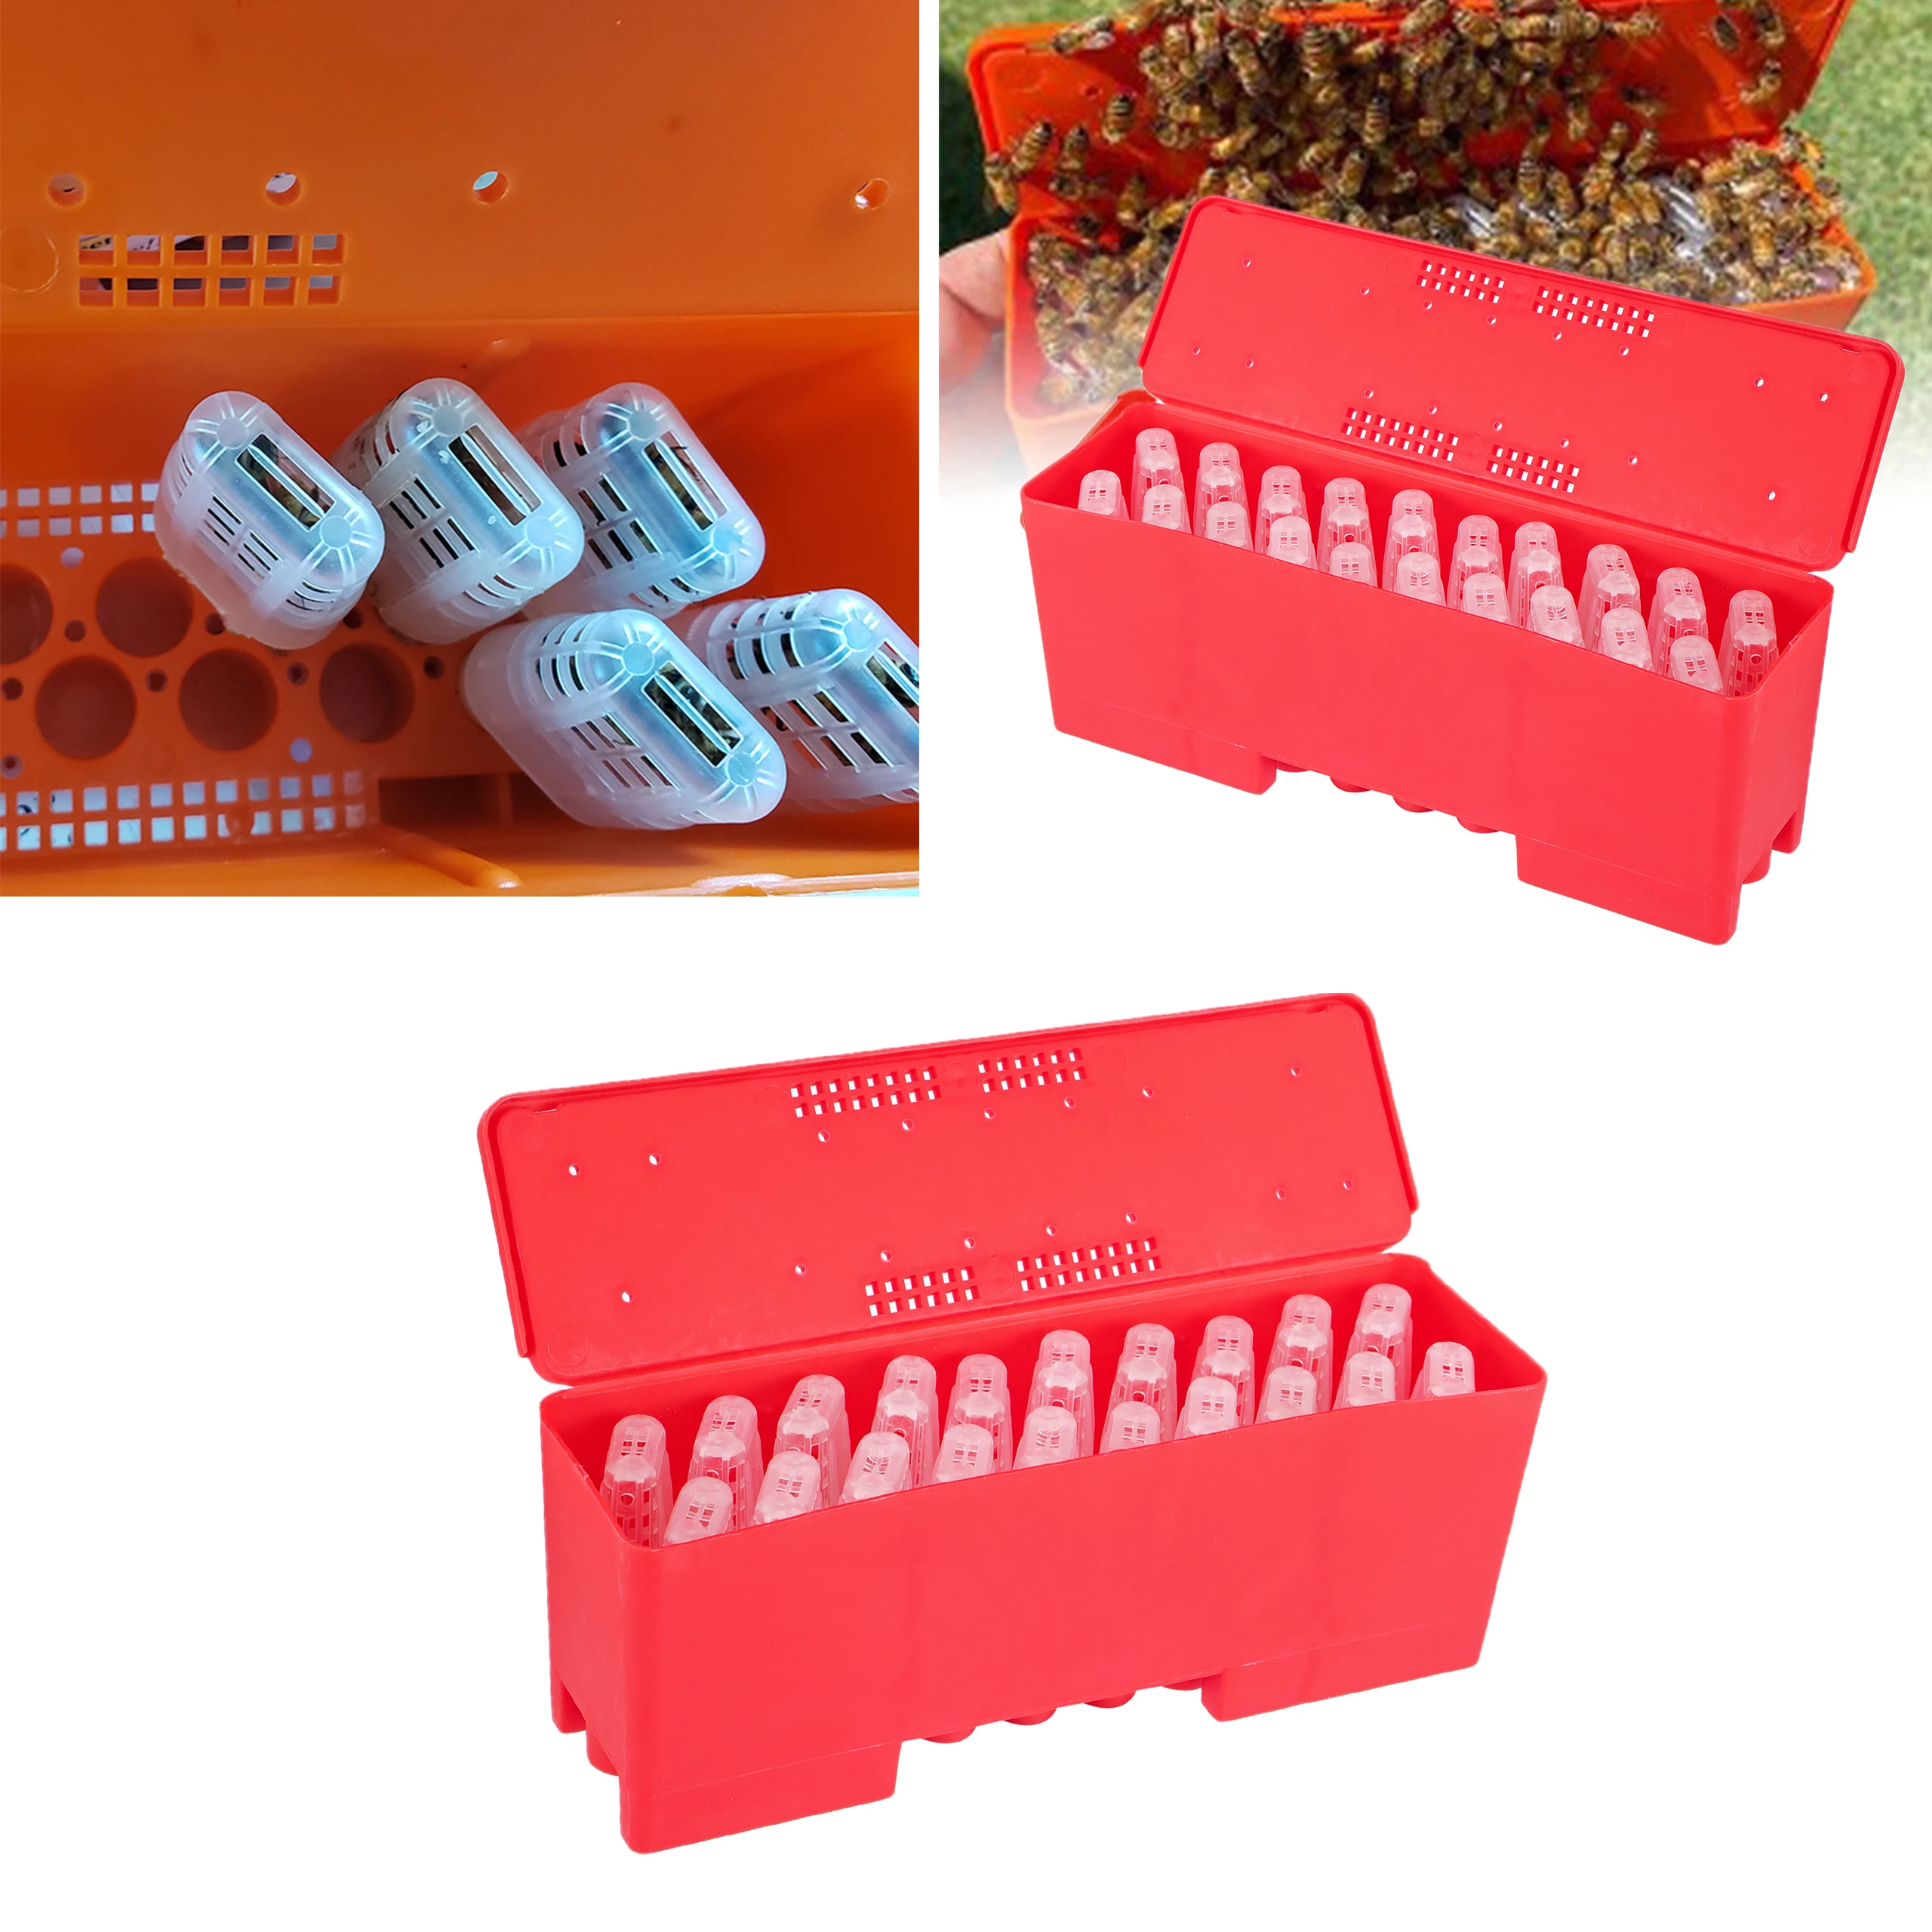 10PCS Functional Queen Cage Bee Match-box Moving Catcher Cage Beekeeping Too.v 